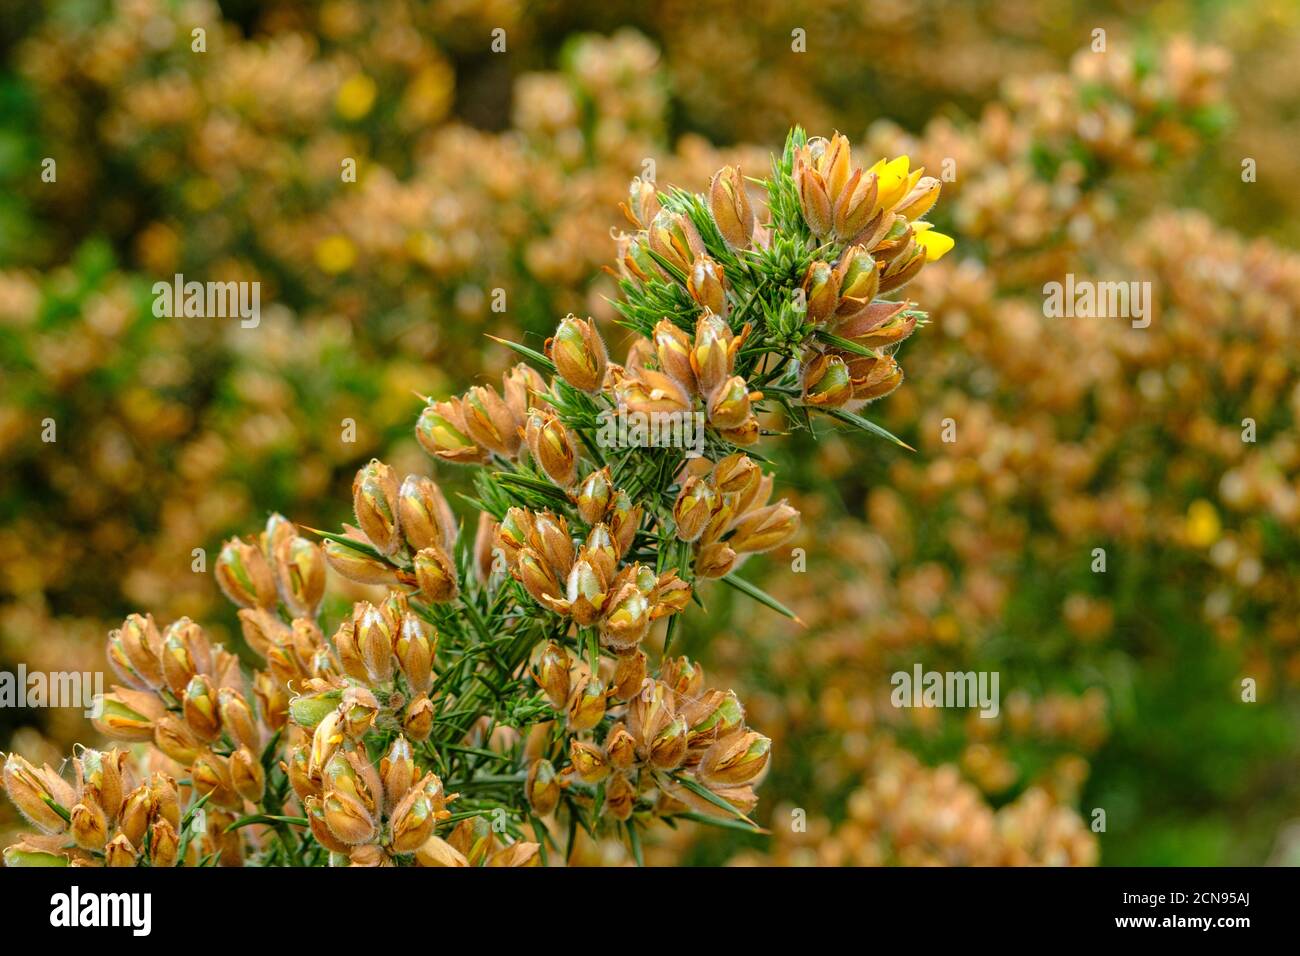 Gorse flower bushes with the yellow tip just starting to bloom. Taken at Ruislip Woods Nature Preserve, Hillingdon,  Northwest London, England. Stock Photo